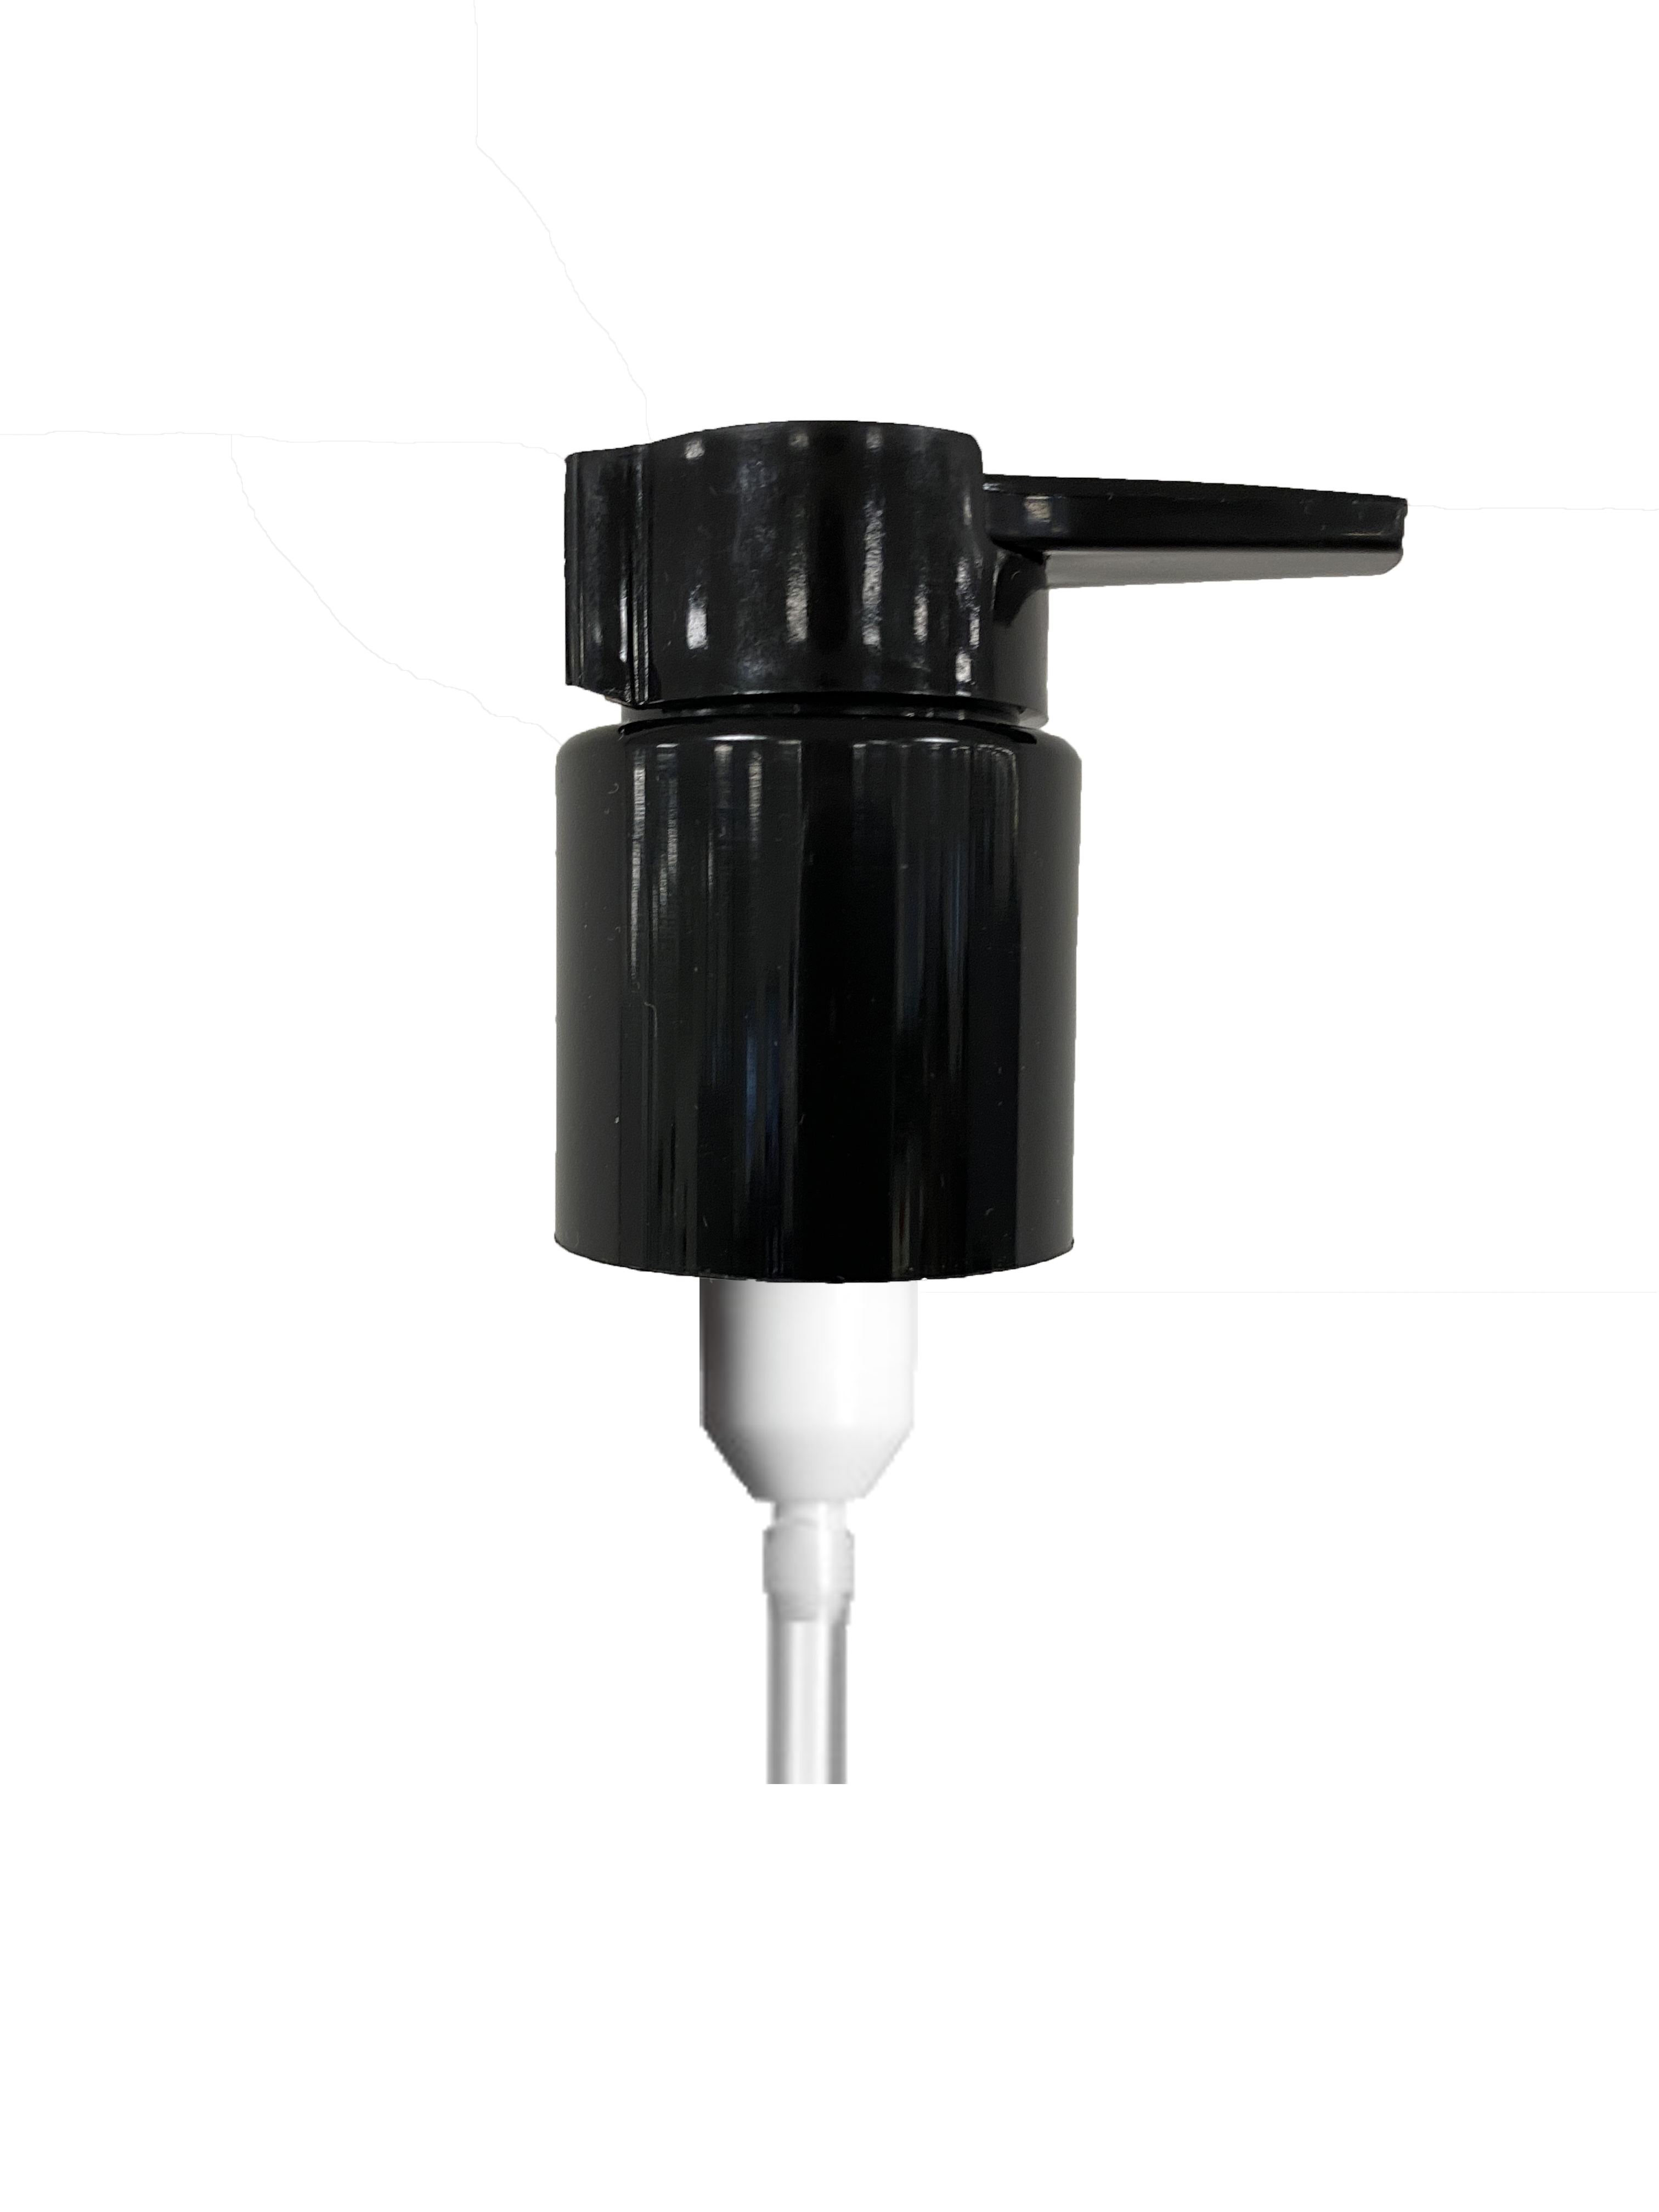 Lotion pump Extended Nozzle 24/410, PP, black, glossy finish, dose 0.50 ml, with 2.0mm tri-seal gasket, black security clip (Orion 200 ml)